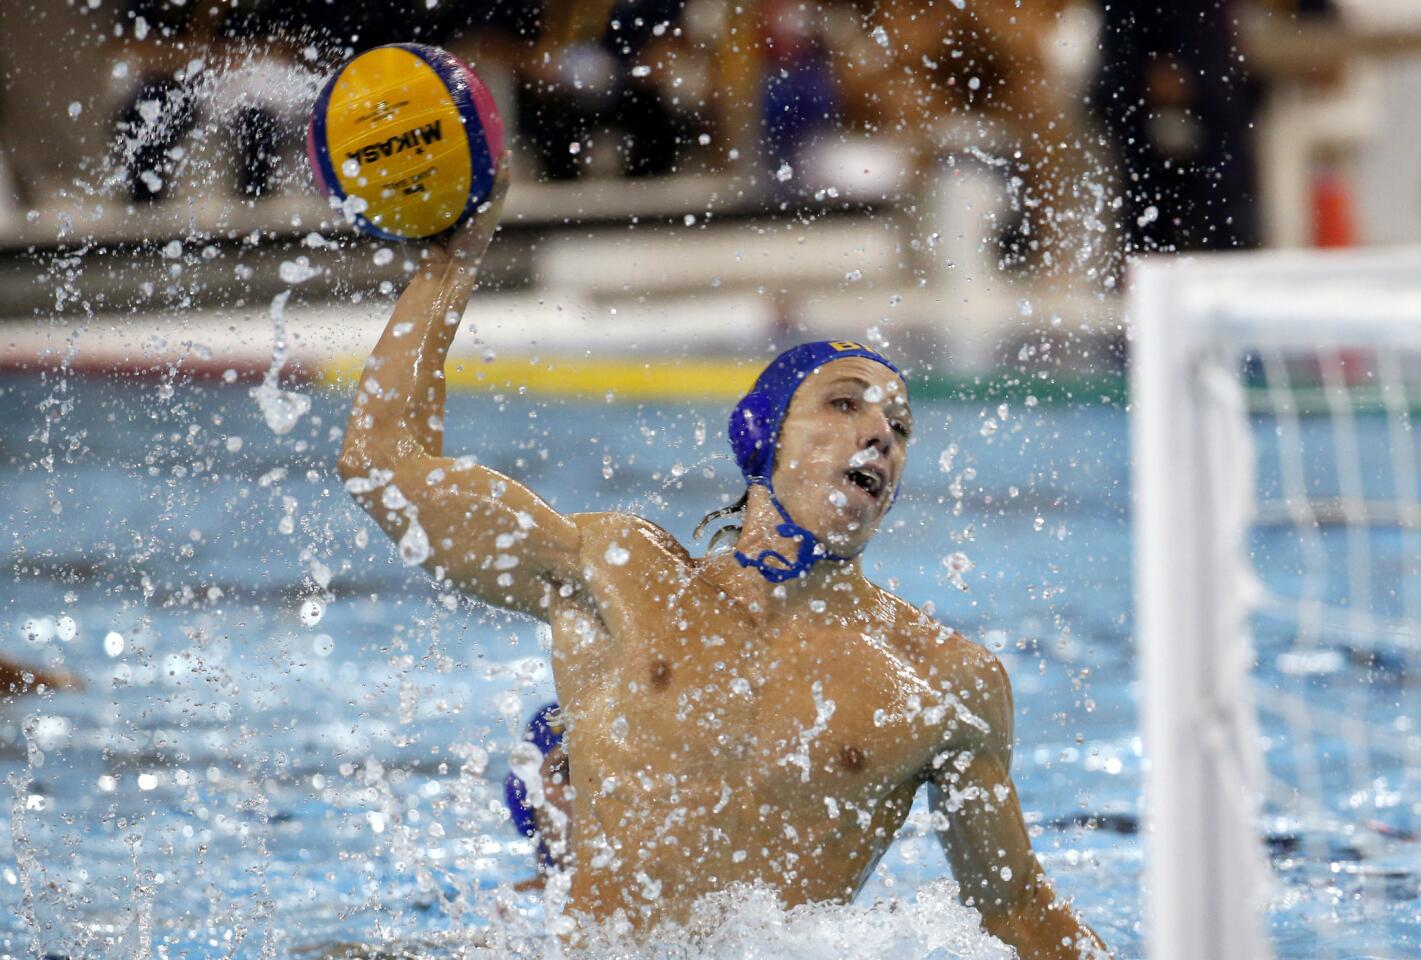 Brazil's Adrian Delgado Baches shoots a penalty against the United States during the second half of the men's water polo gold medal match at the Pan Am Games, Wednesday, July 15, 2015, in Markham, Ontario. The U.S. won 11-9. (AP Photo/Julio Cortez) ORG XMIT: CAJXC181